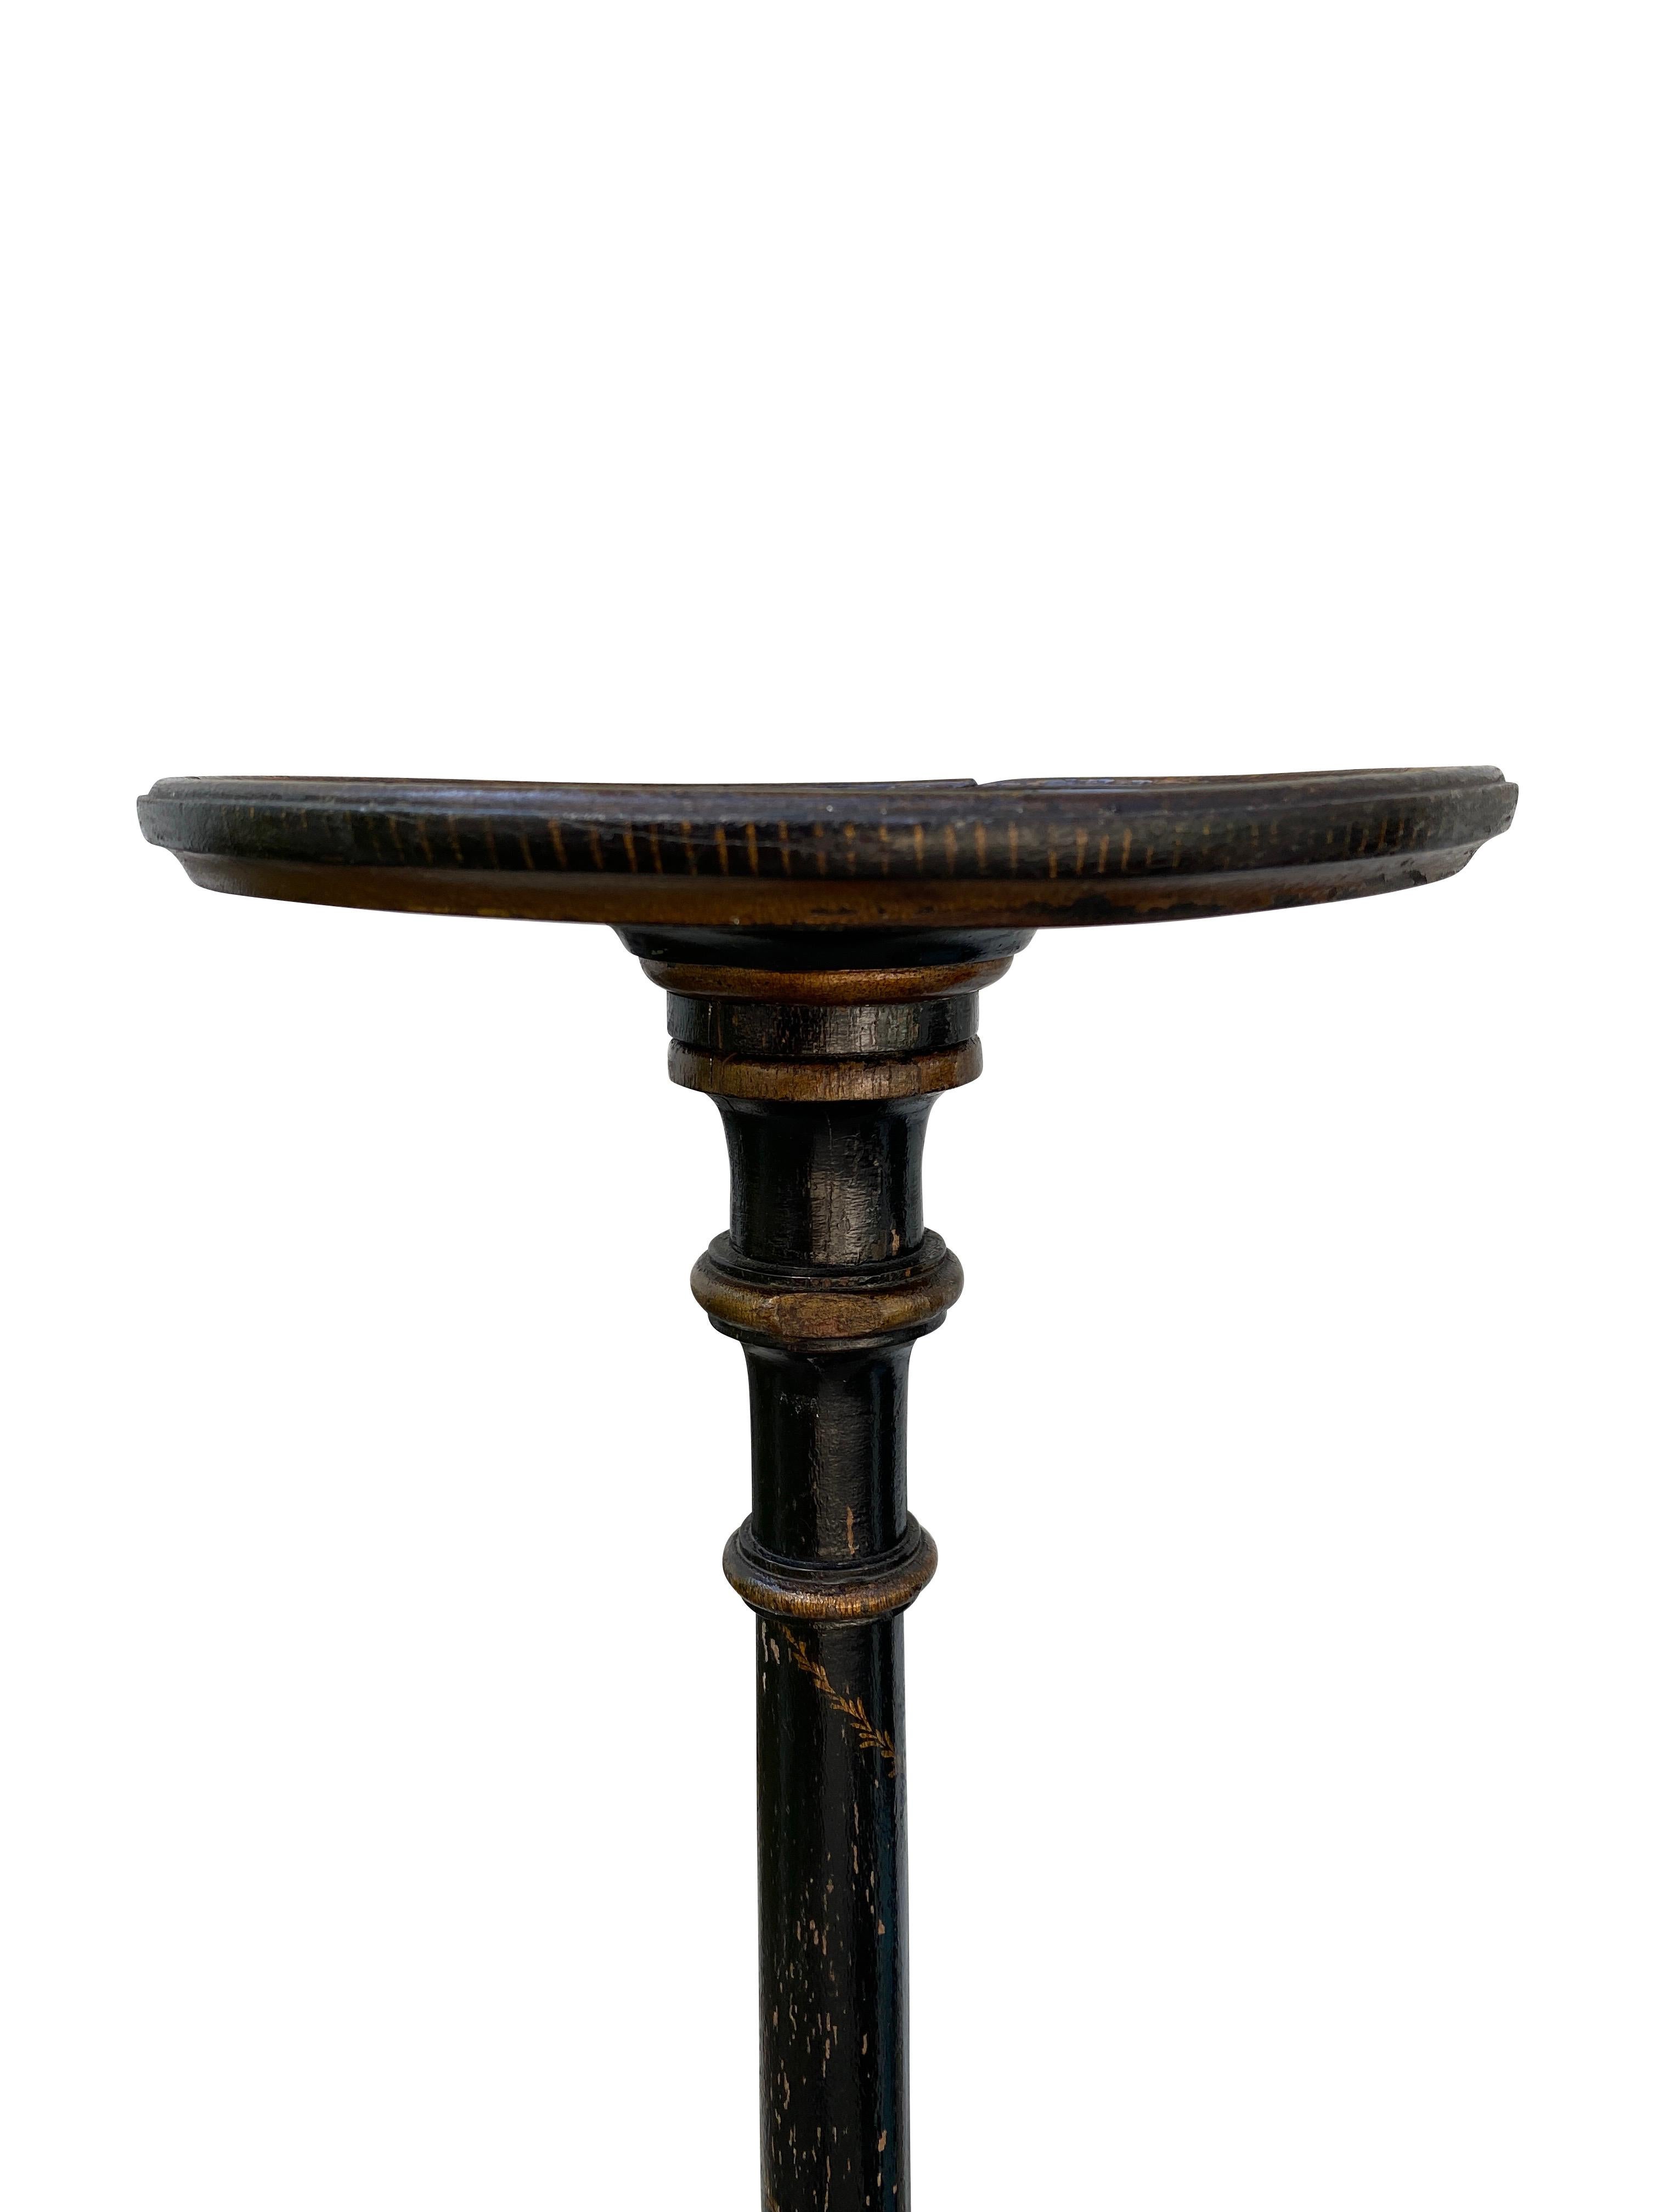 English Regency Japanned Candle Stand For Sale